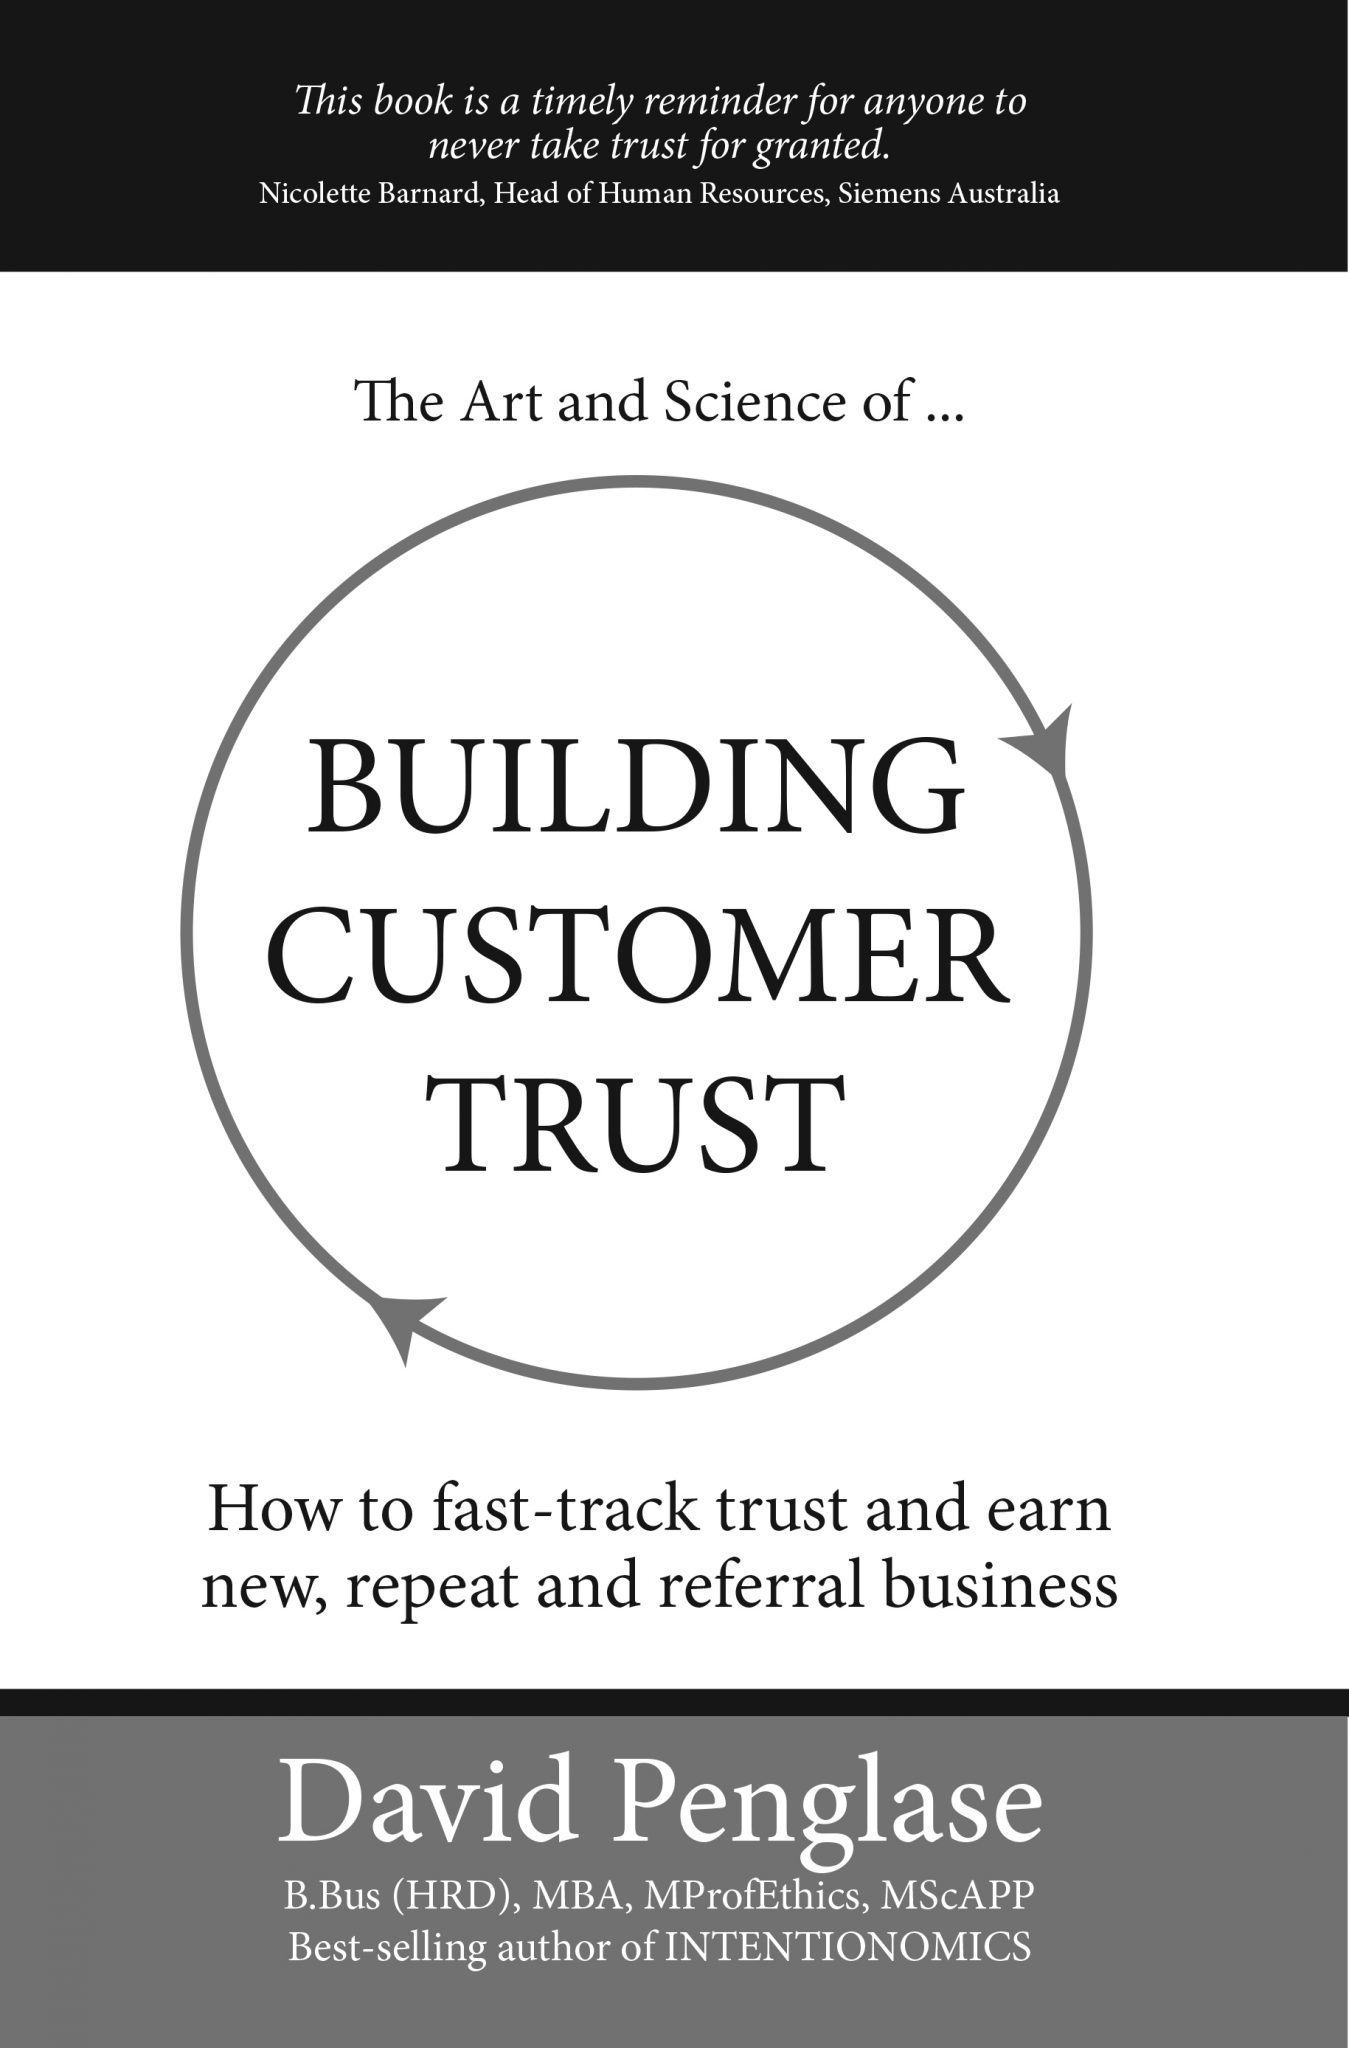 The Art and Science of Building Customer Trust